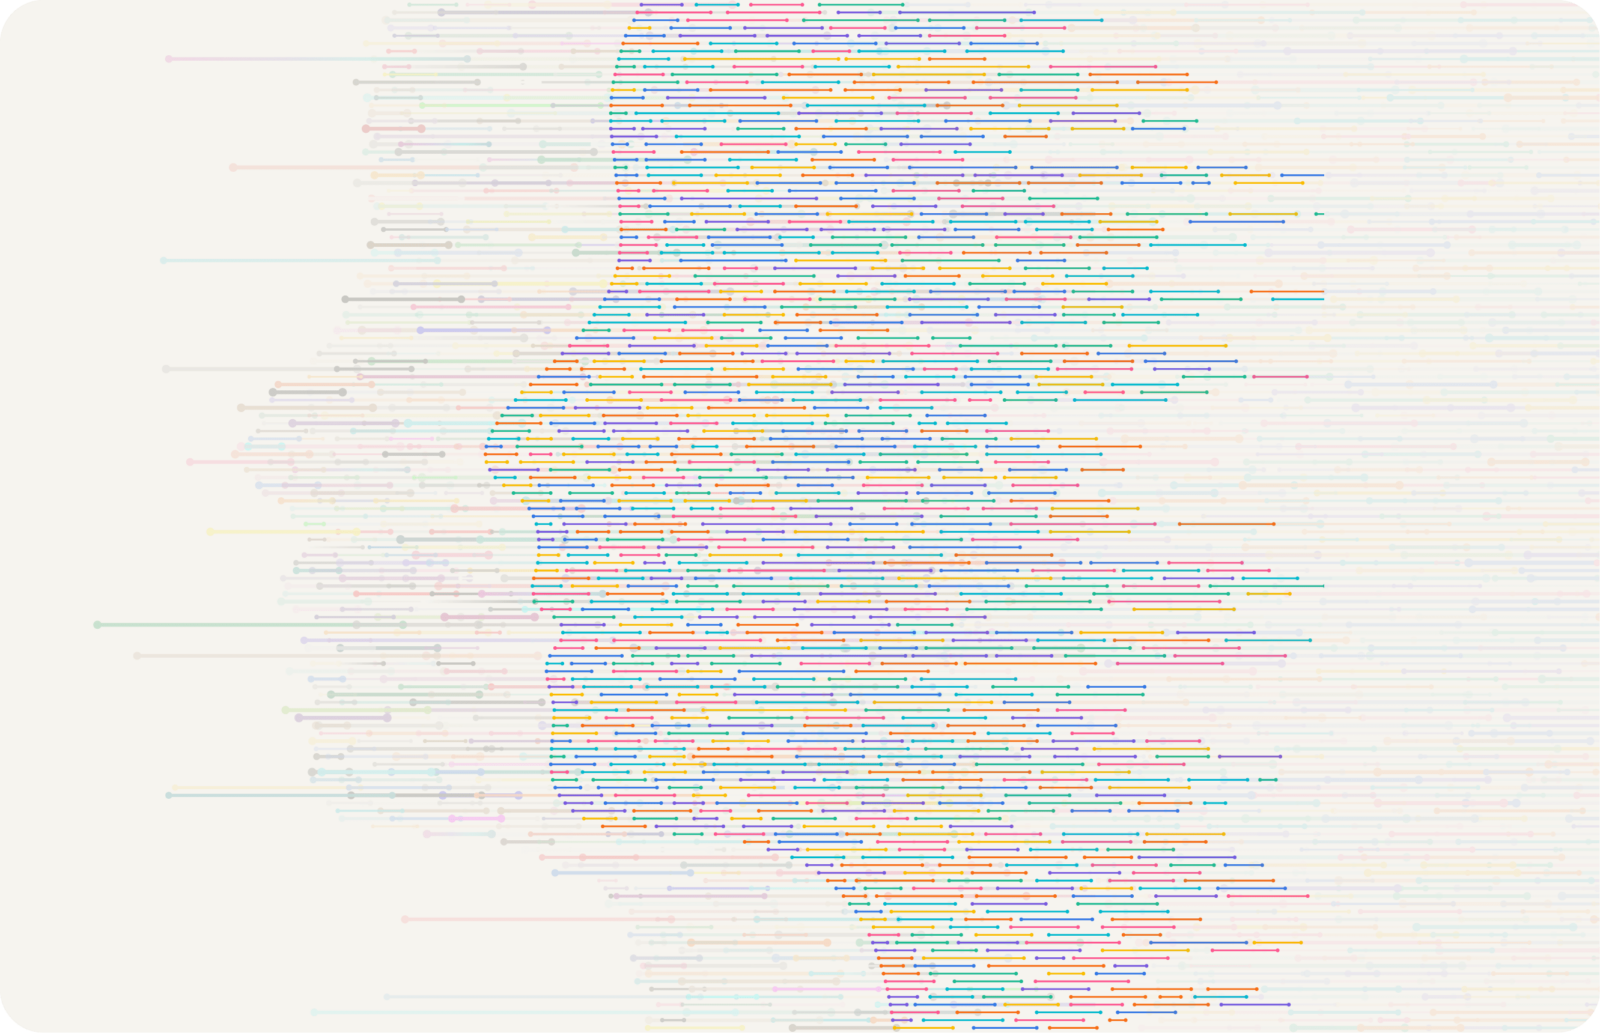 An illustration showing a face profile made up of many colorful points of data.